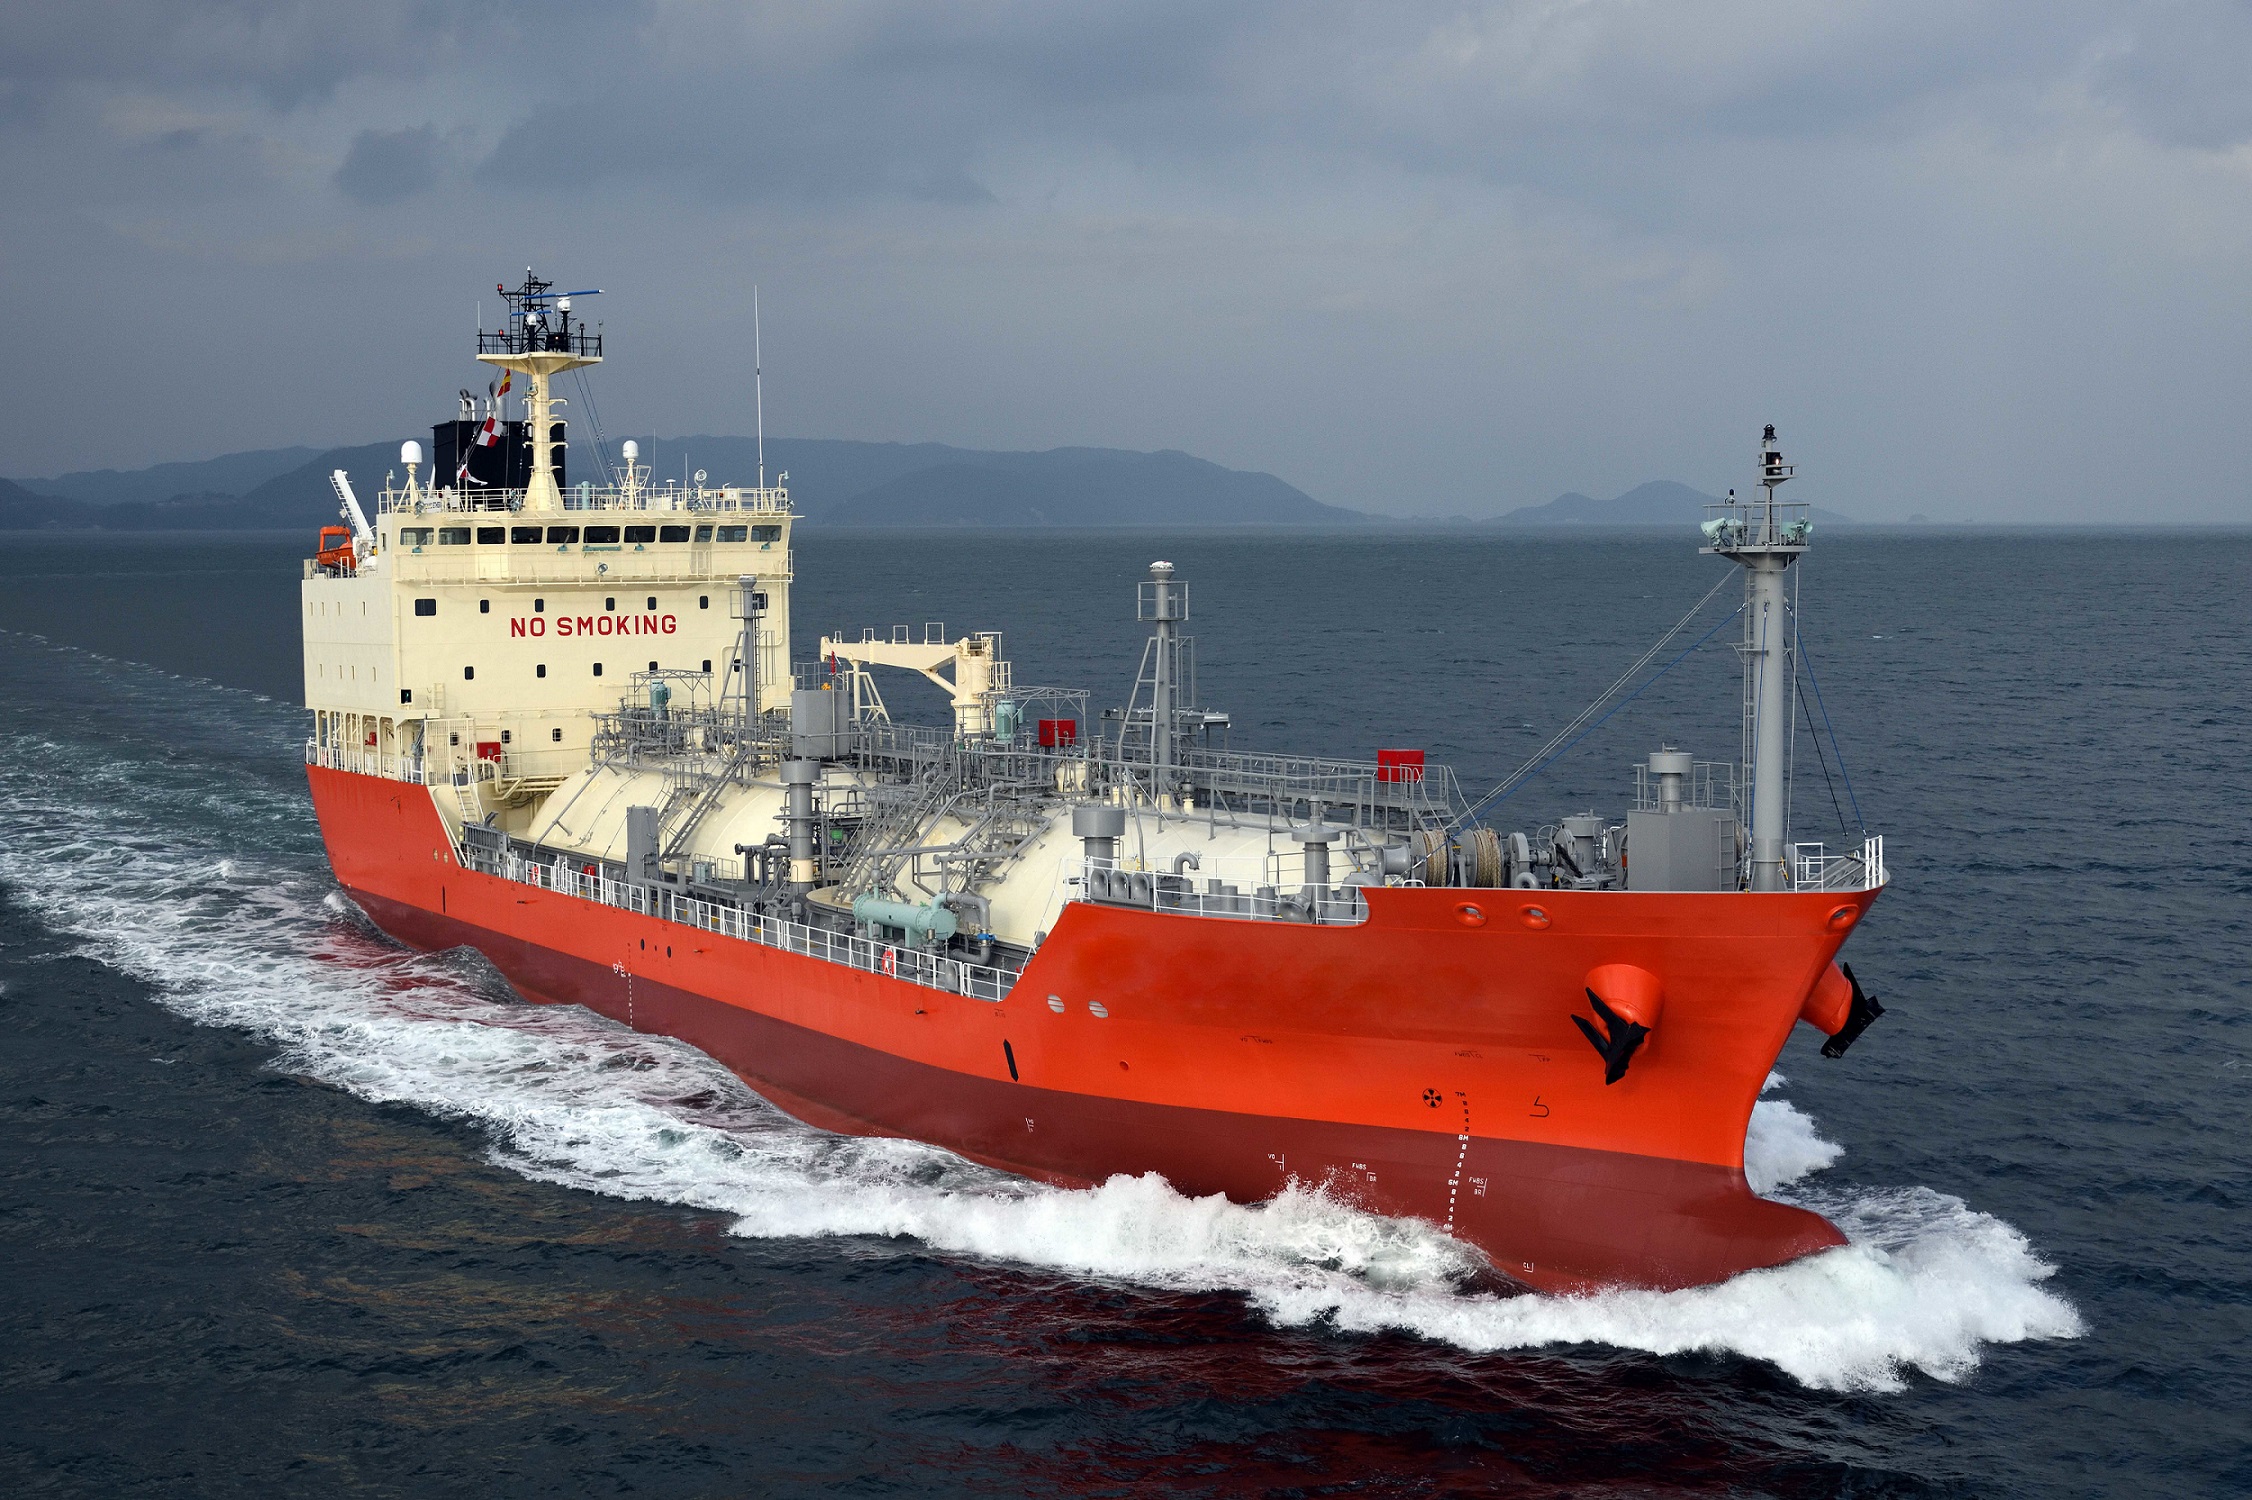 TSUNEISHI SHIPBUILDING has completed the delivery of its first LPG carrier